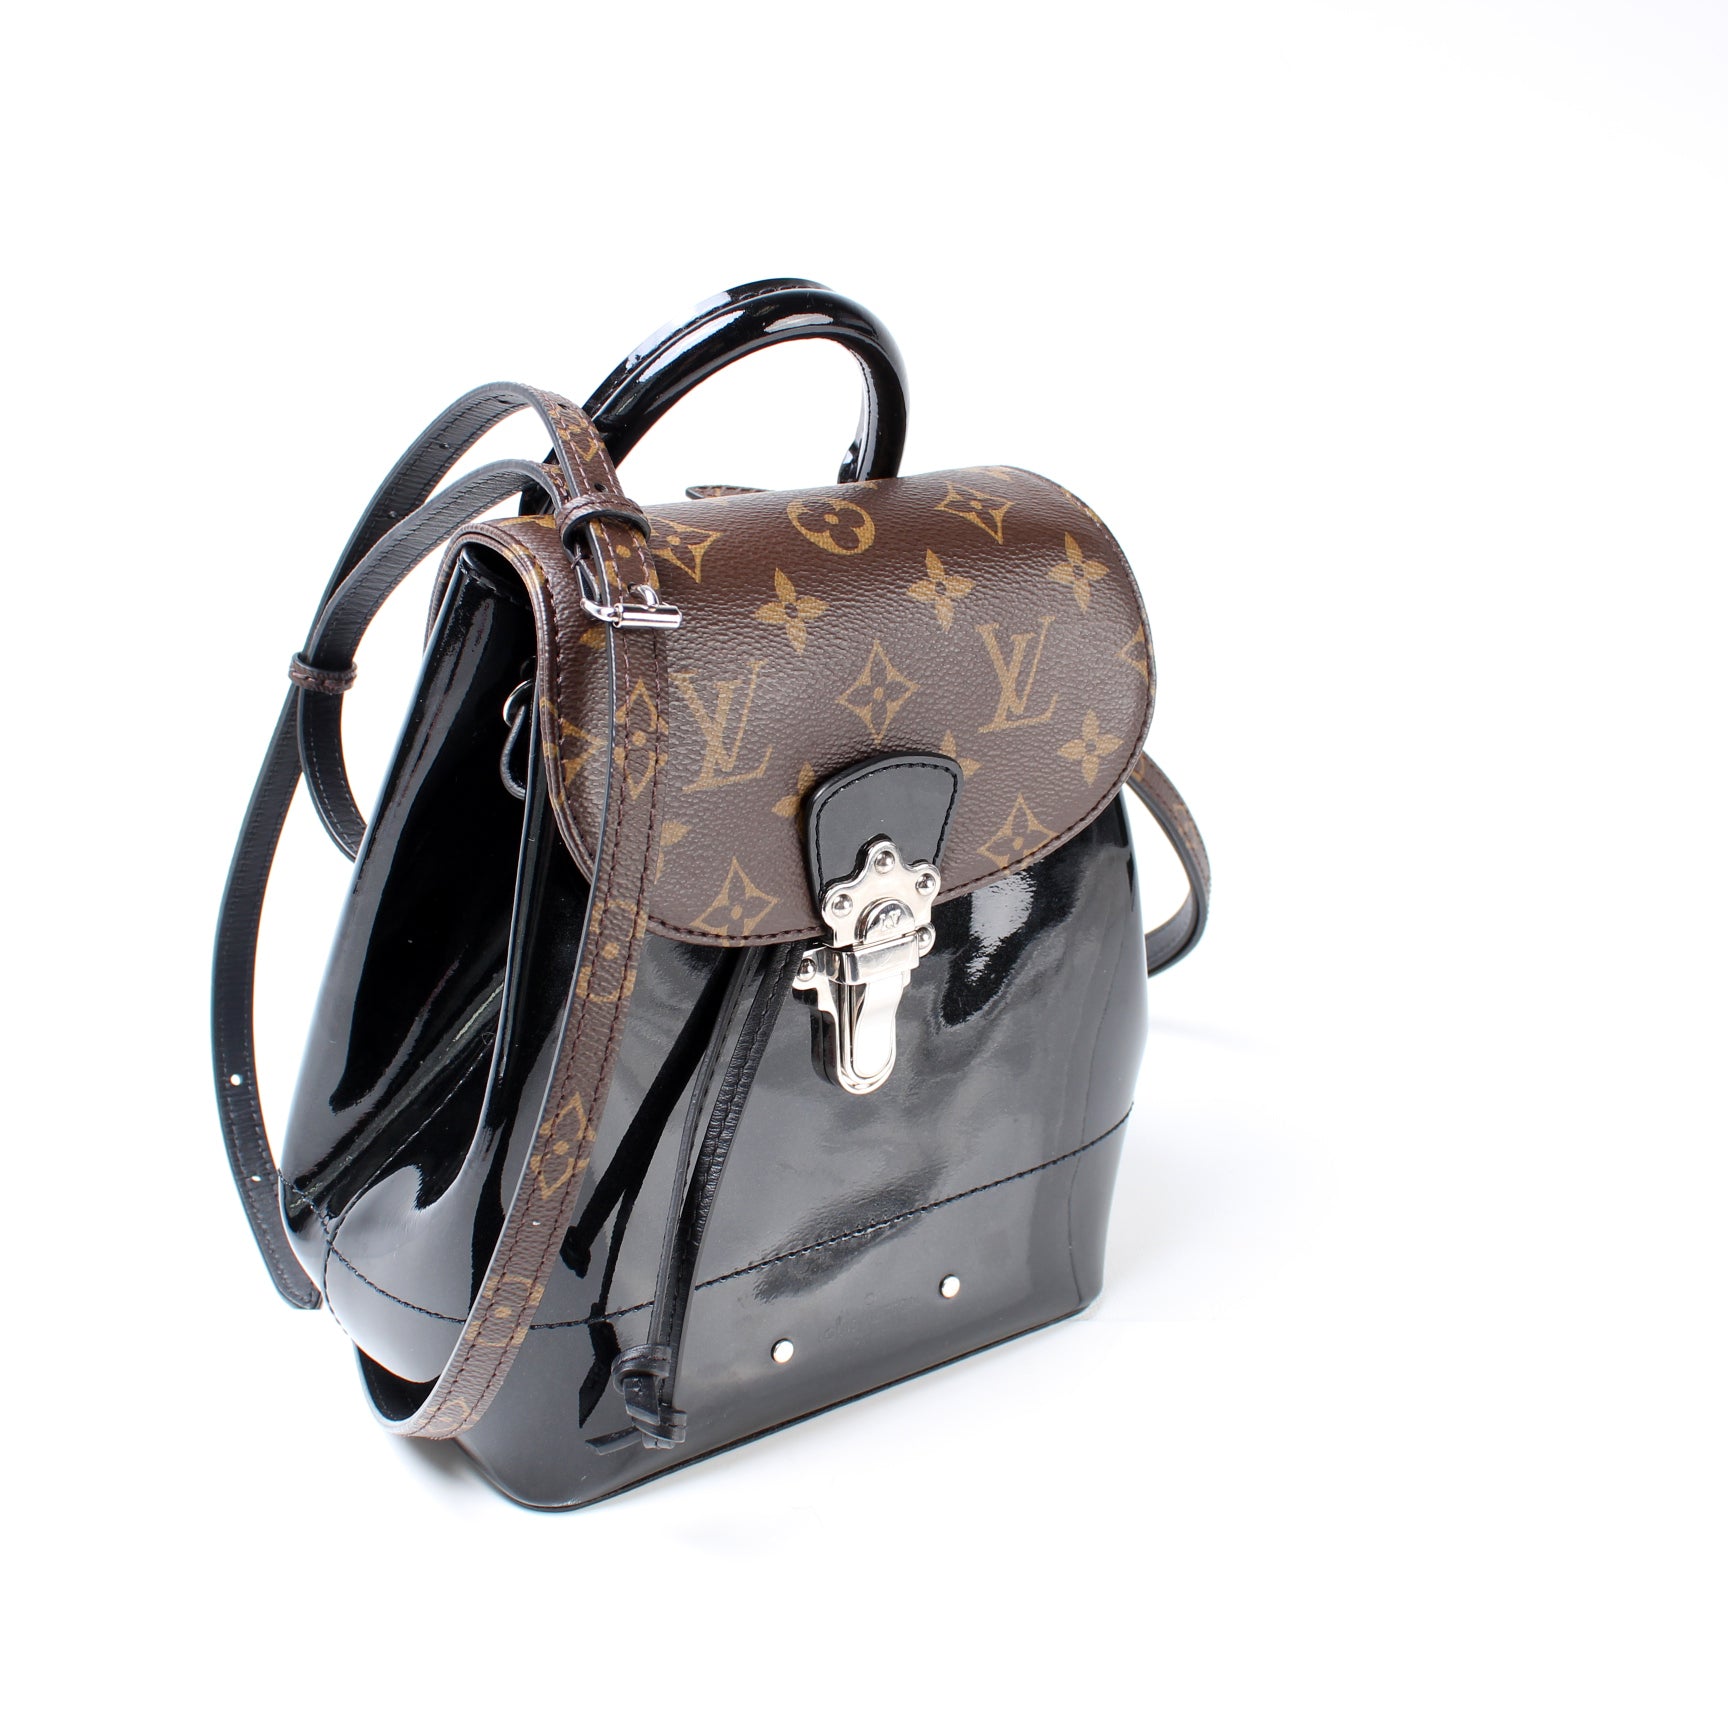 Hot Springs patent leather backpack